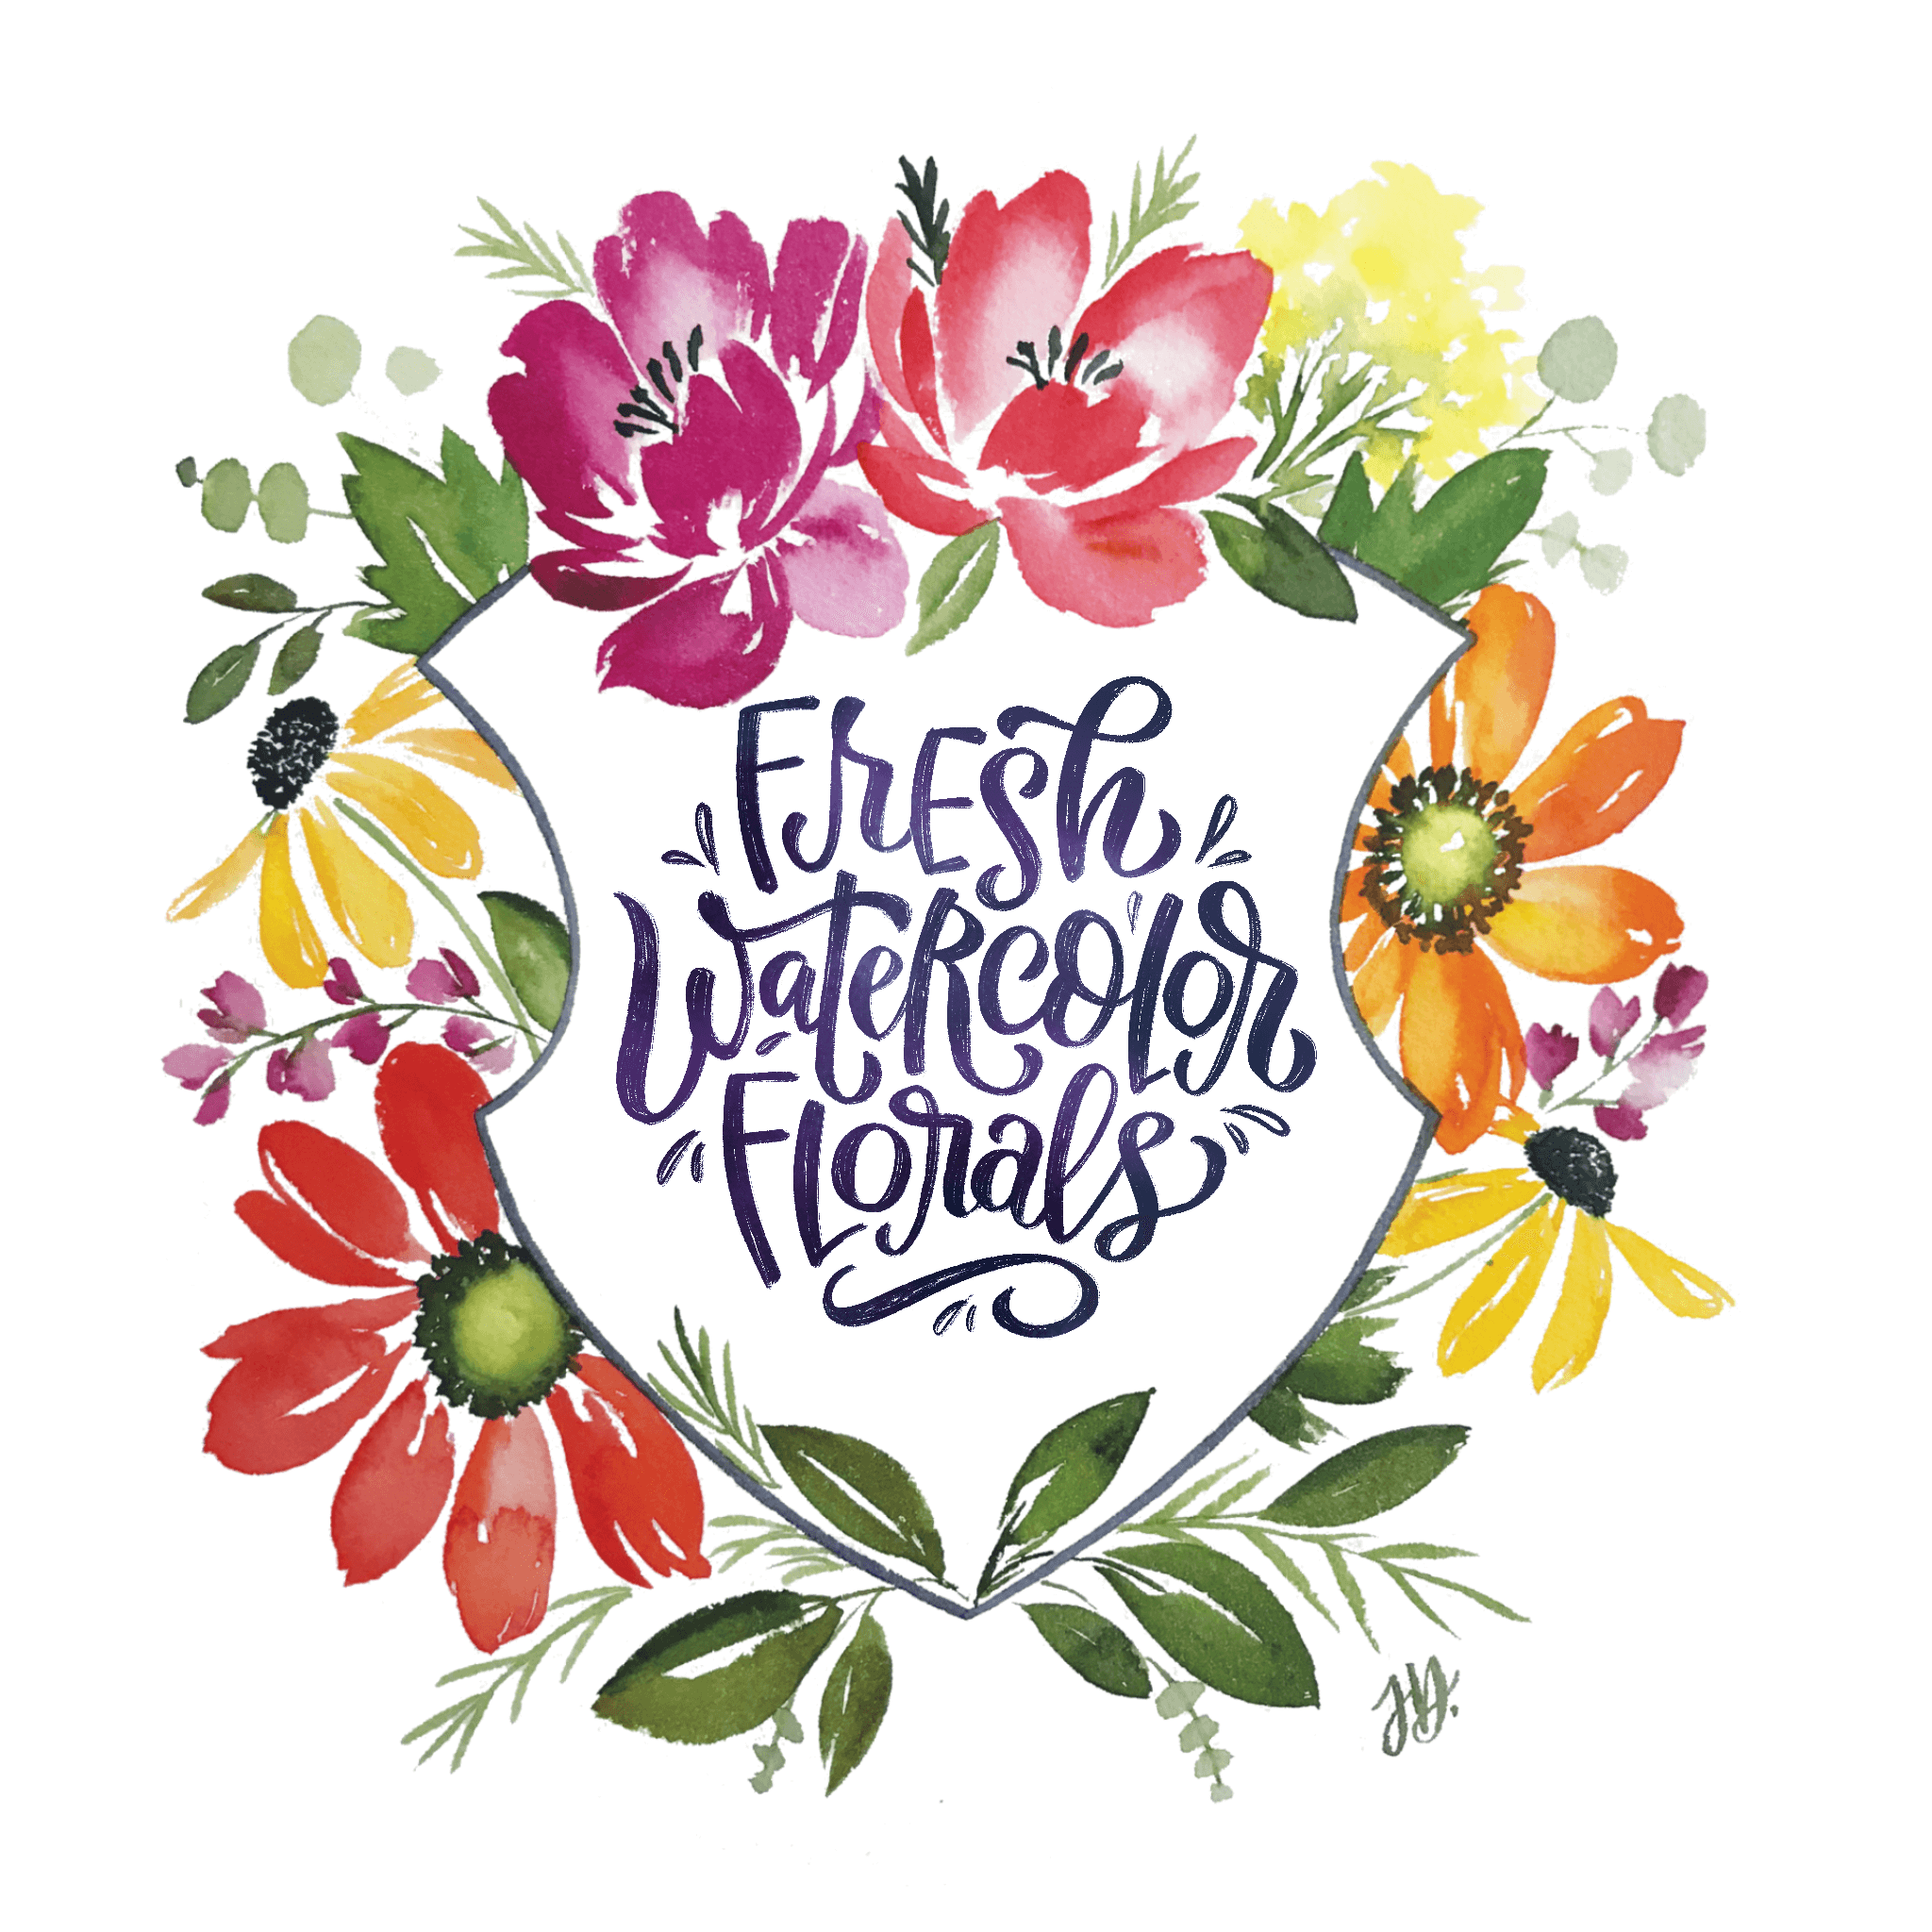 Learn how to quickly create breathtaking watercolor floral compositions in this online, self-paced, beginner-friendly course taught by Jeannie Dickson and Amanda Arneill.